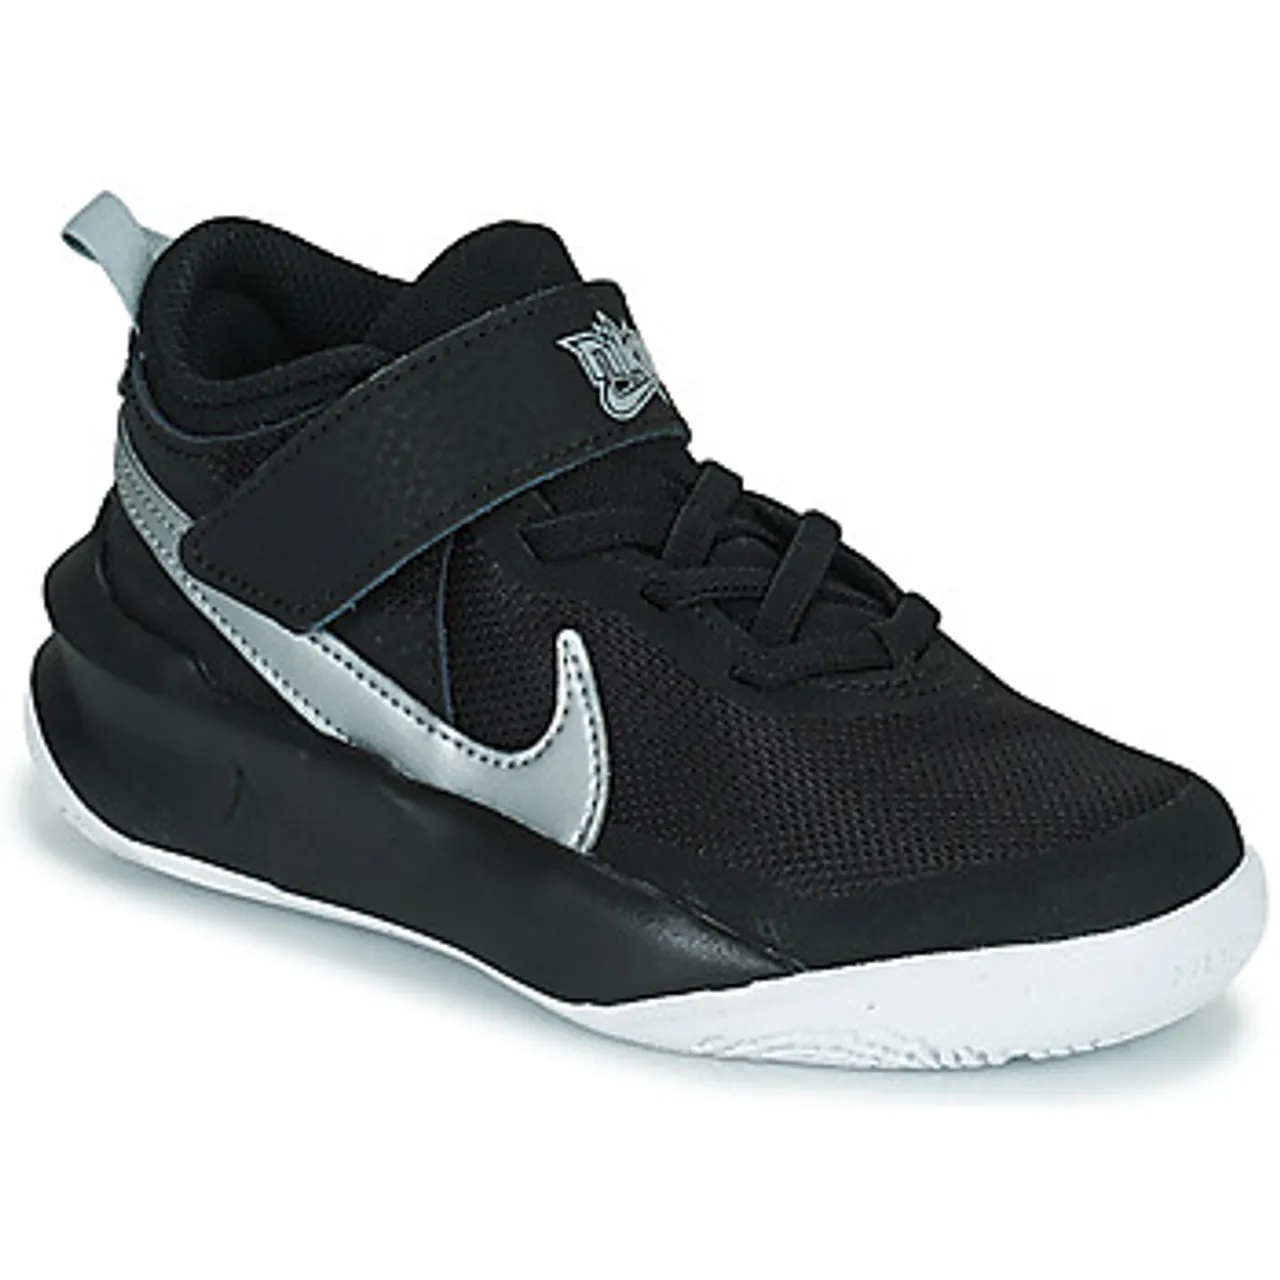 Nike  TEAM HUSTLE D 10 (PS)  boys's Children's Shoes (High-top Trainers) in Black